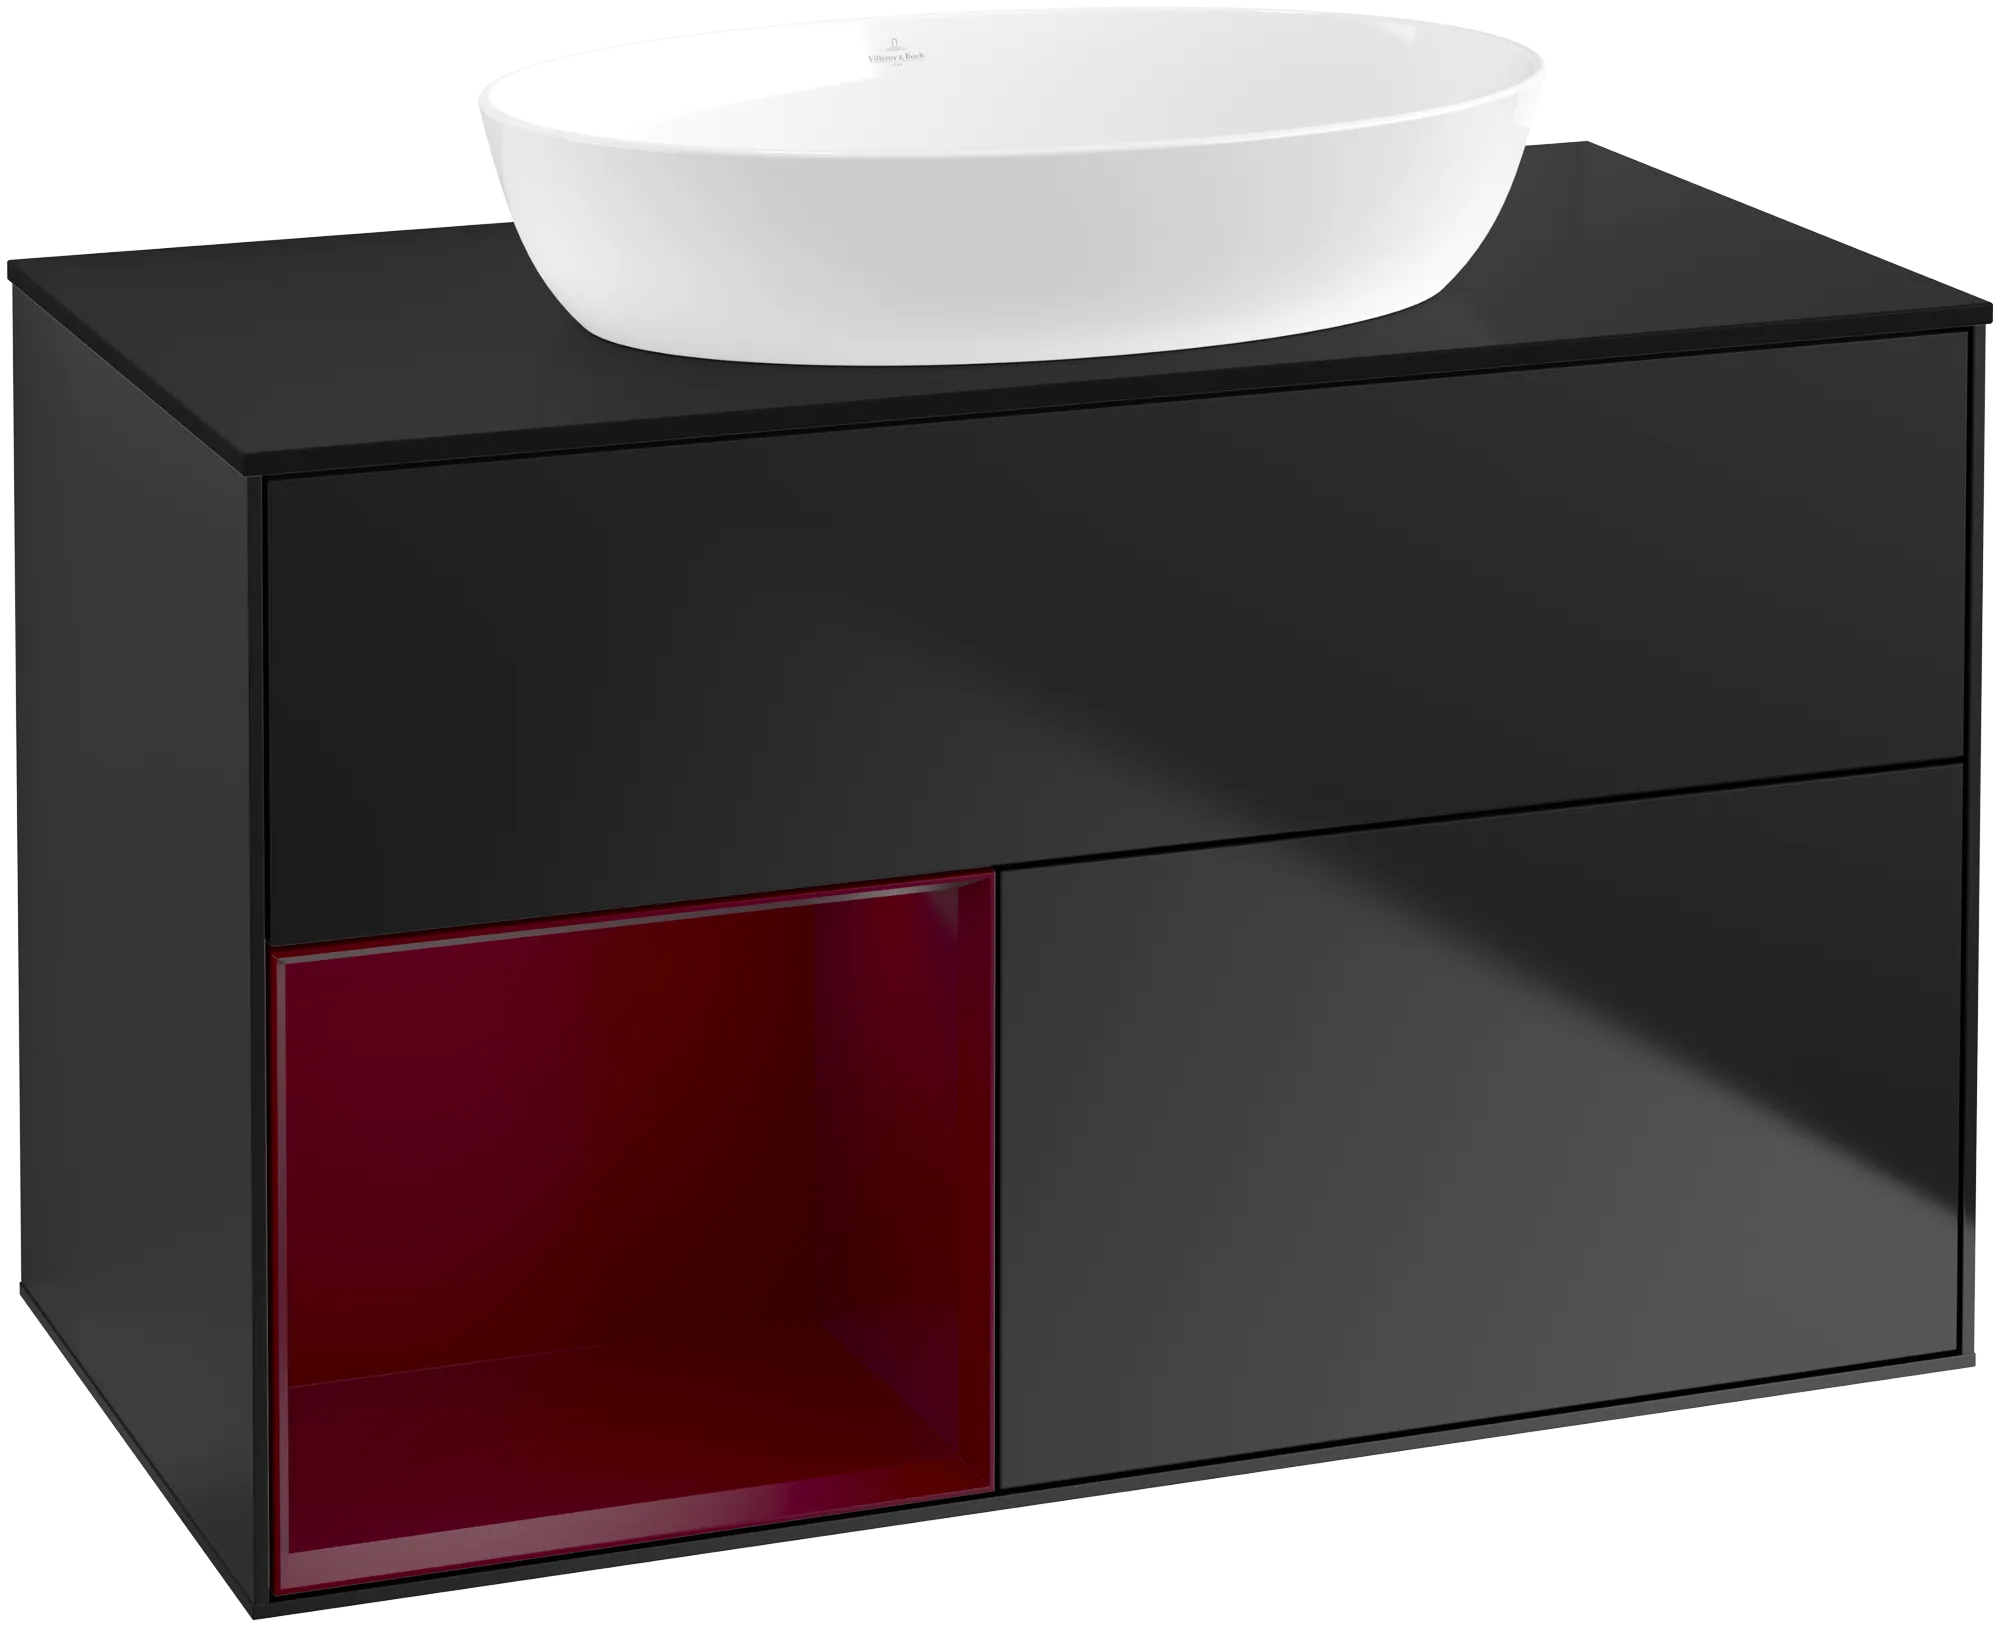 VILLEROY BOCH Finion Vanity unit, with lighting, 2 pull-out compartments, 1000 x 603 x 501 mm, Black Matt Lacquer / Peony Matt Lacquer / Glass Black Matt #GA12HBPD resmi